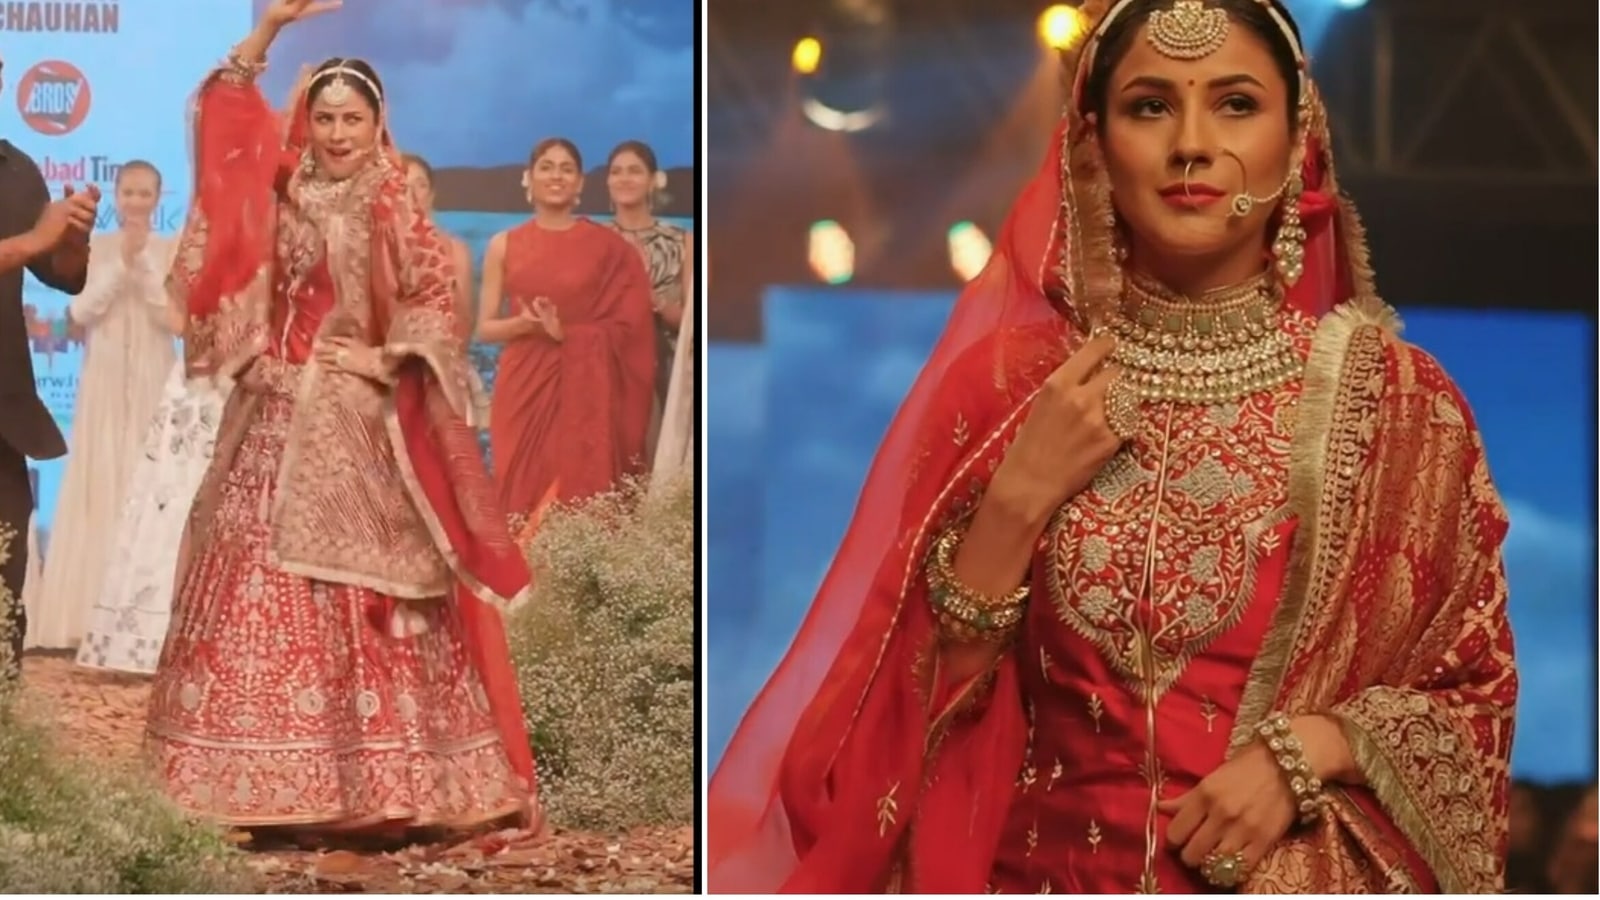 Shehnaaz Gill dances to Sidhu Moose Wala’s songs as she makes her ramp debut as a bride in red. Watch